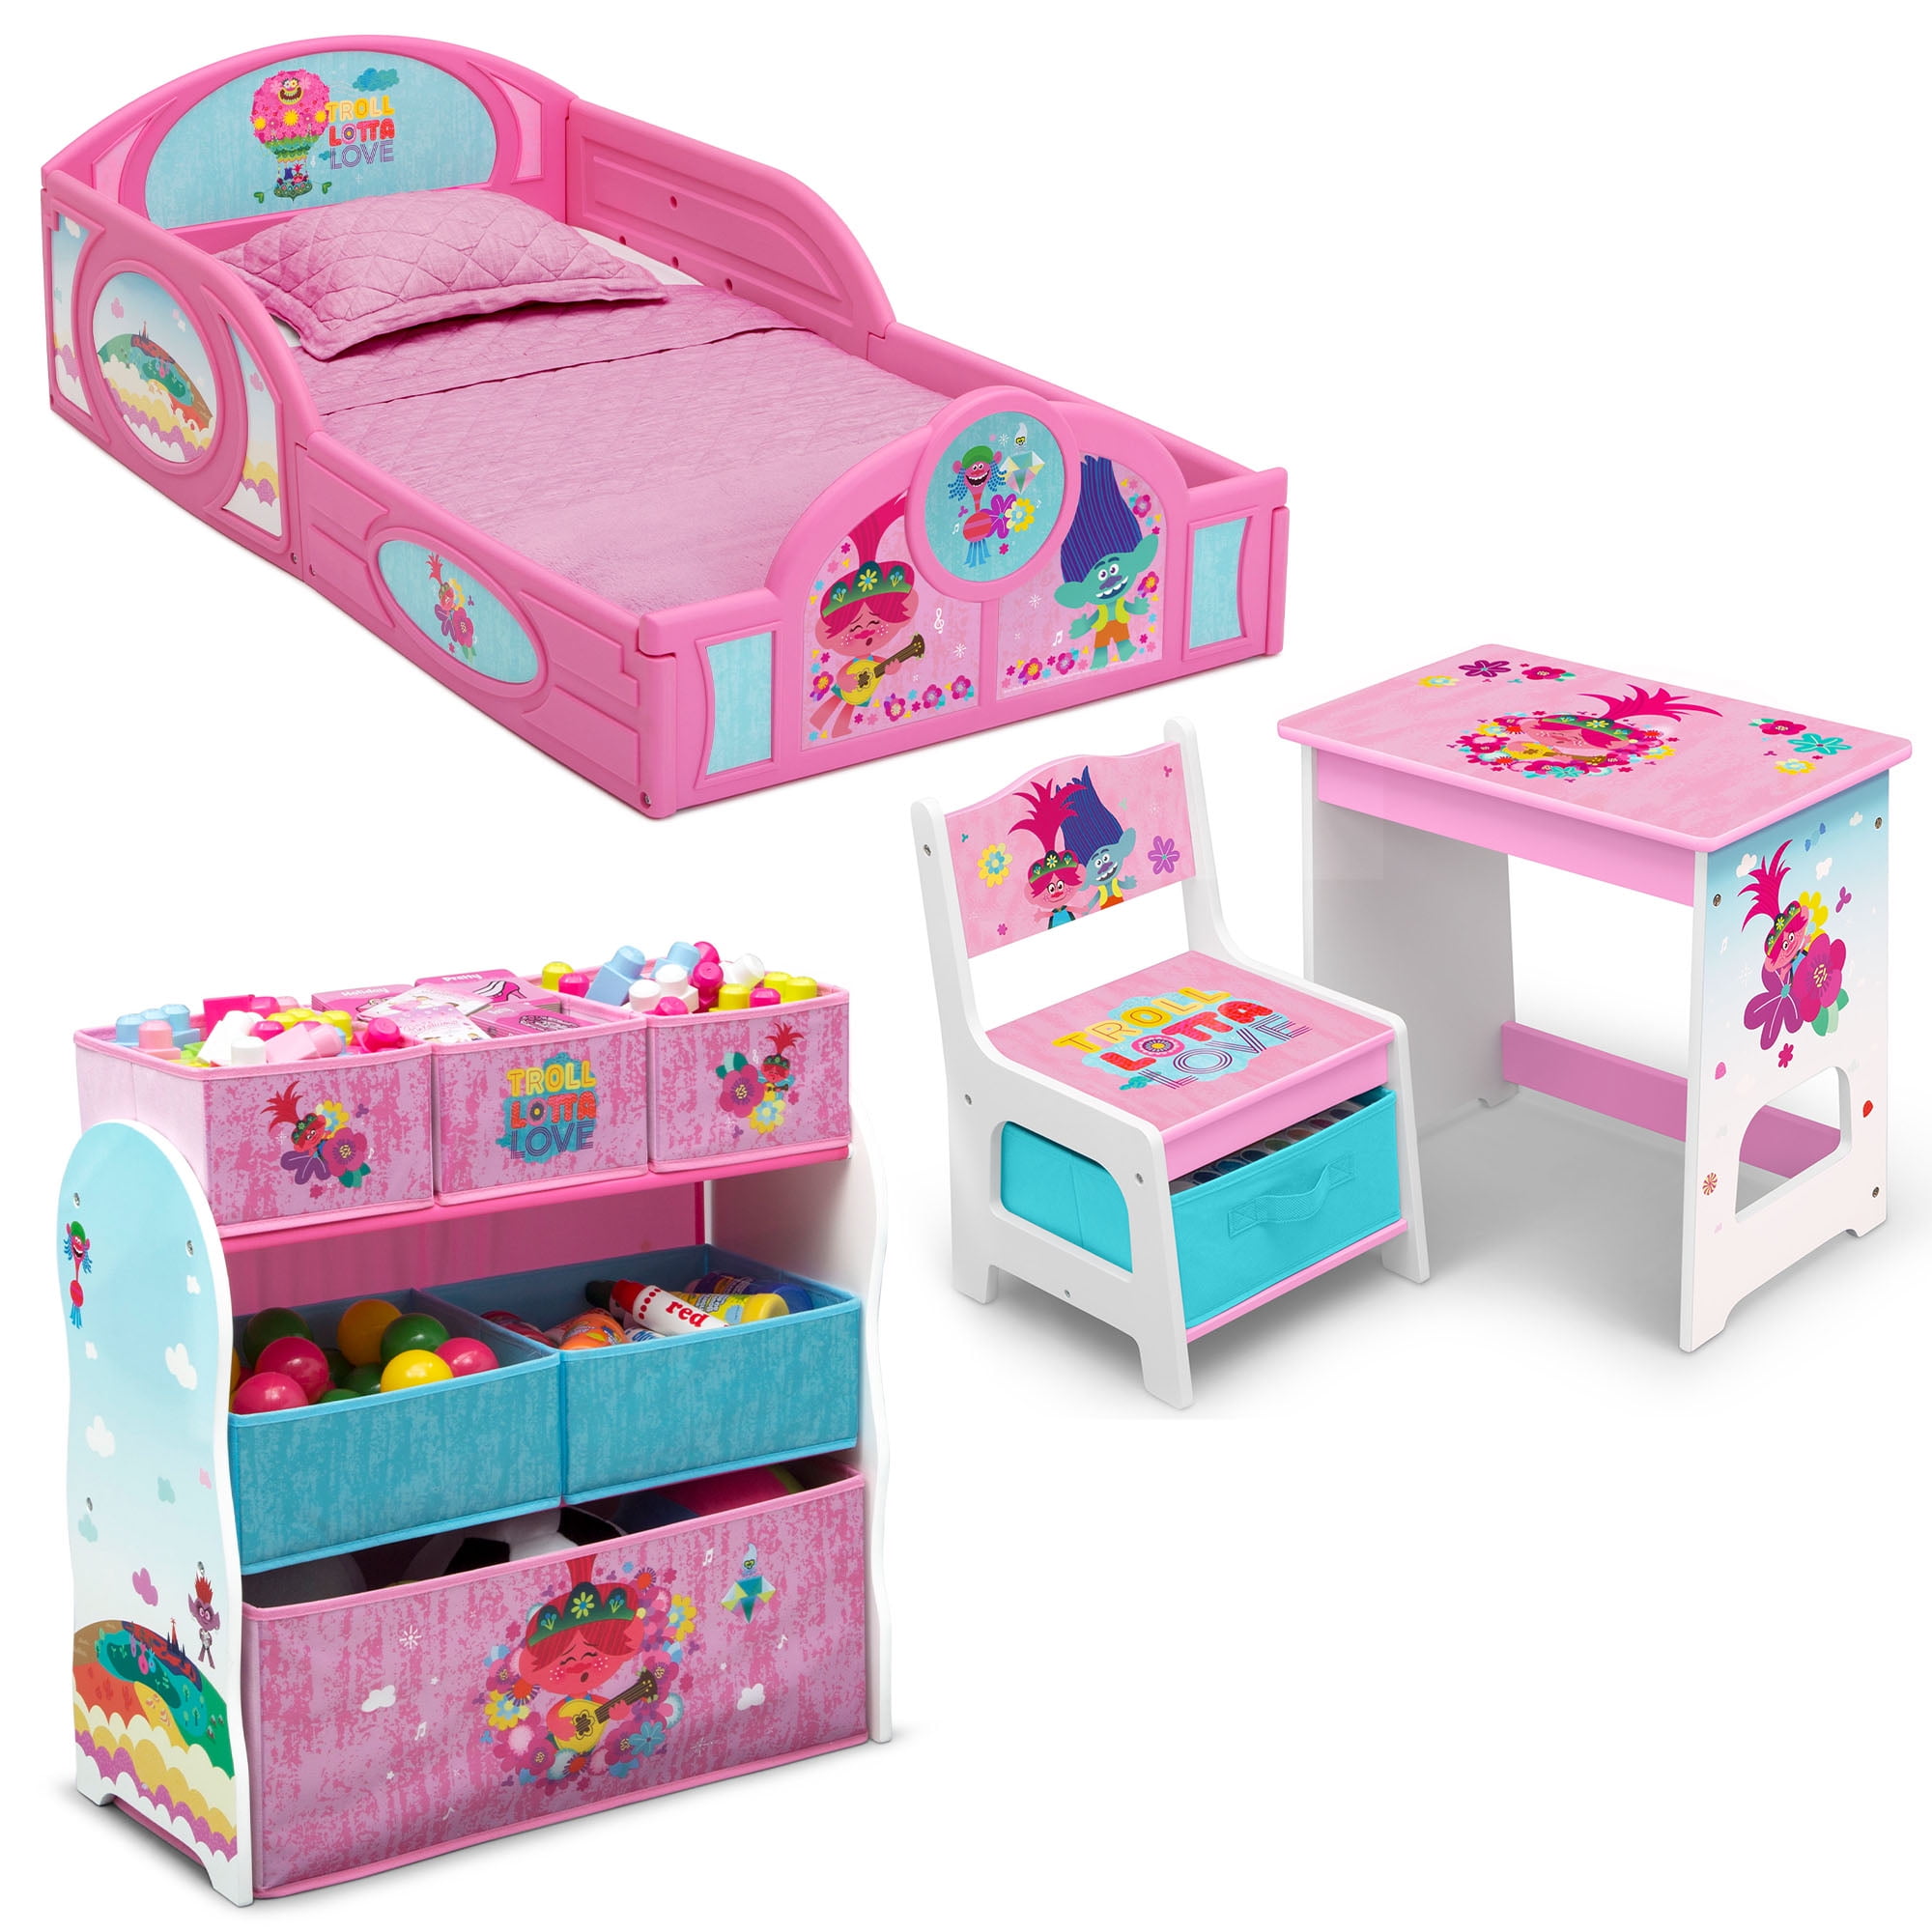 Boy Bedroom Furniture Set Toy Organizer Kid Child Toddler Bed Table Chairs New 